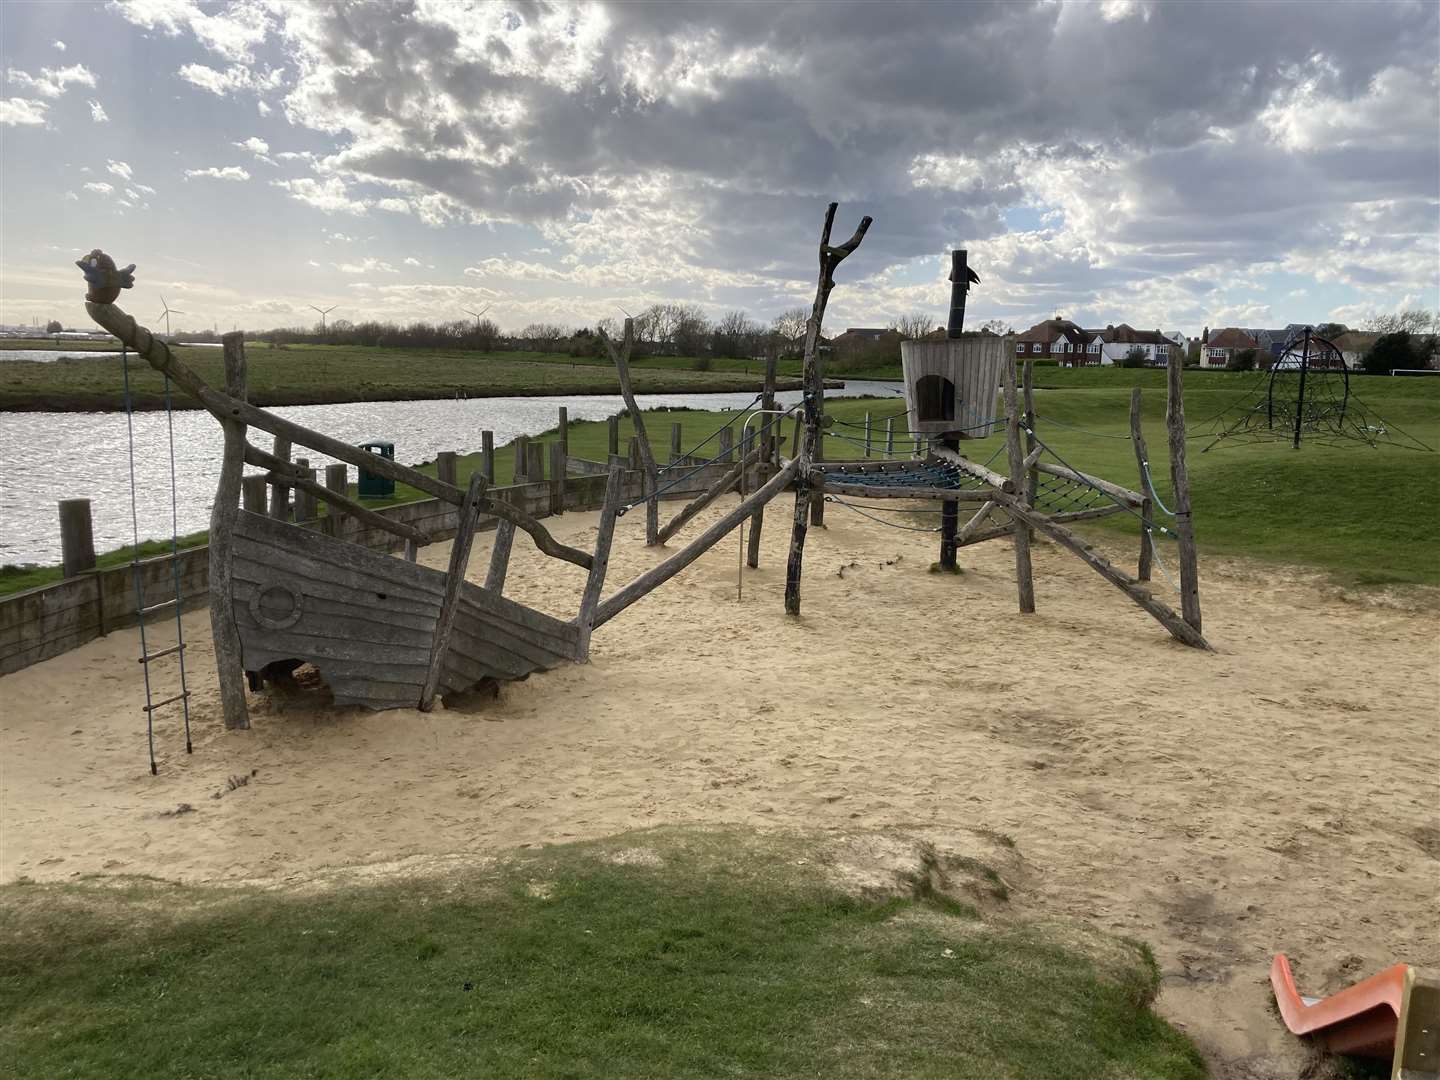 Children's play area and pirates' boat